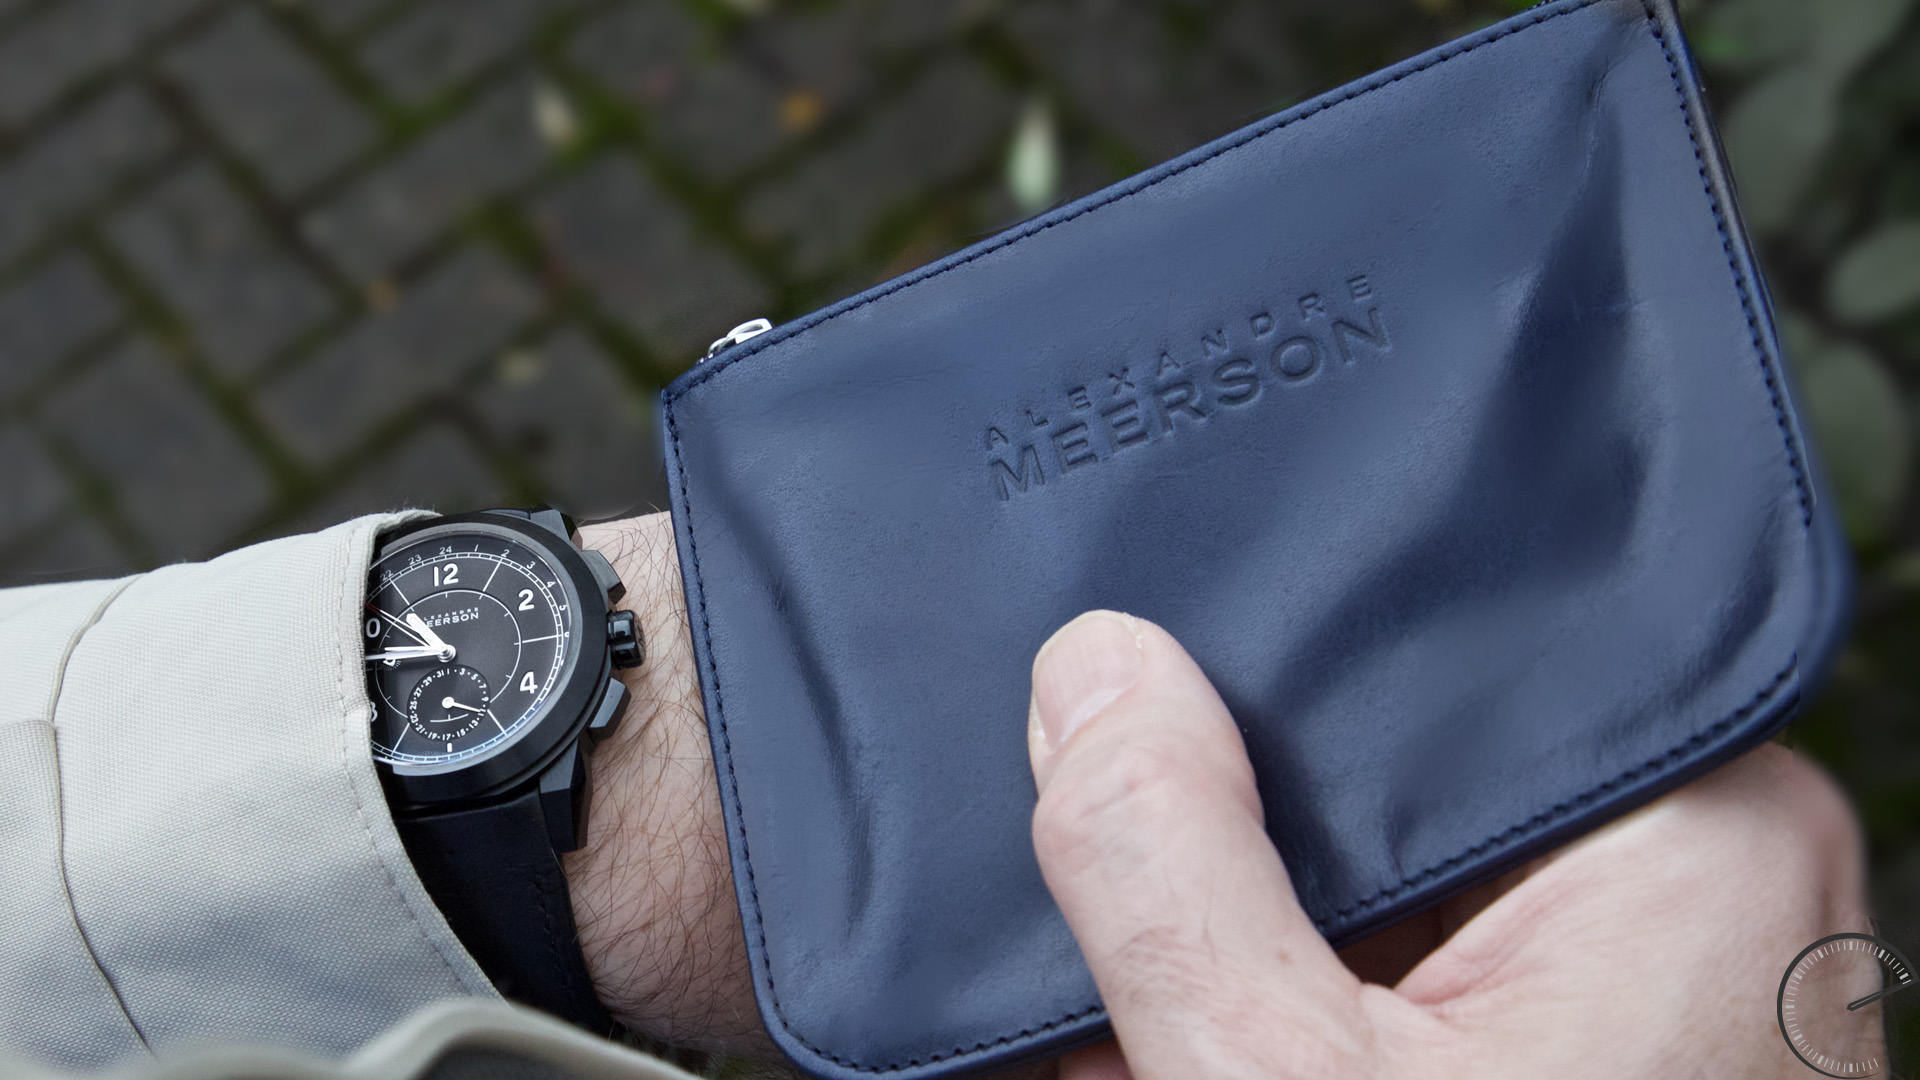 Meerson D15 MK-1 GMT Black ADLC - in-depth watch replica reviews by ESCAPEMENT magazine